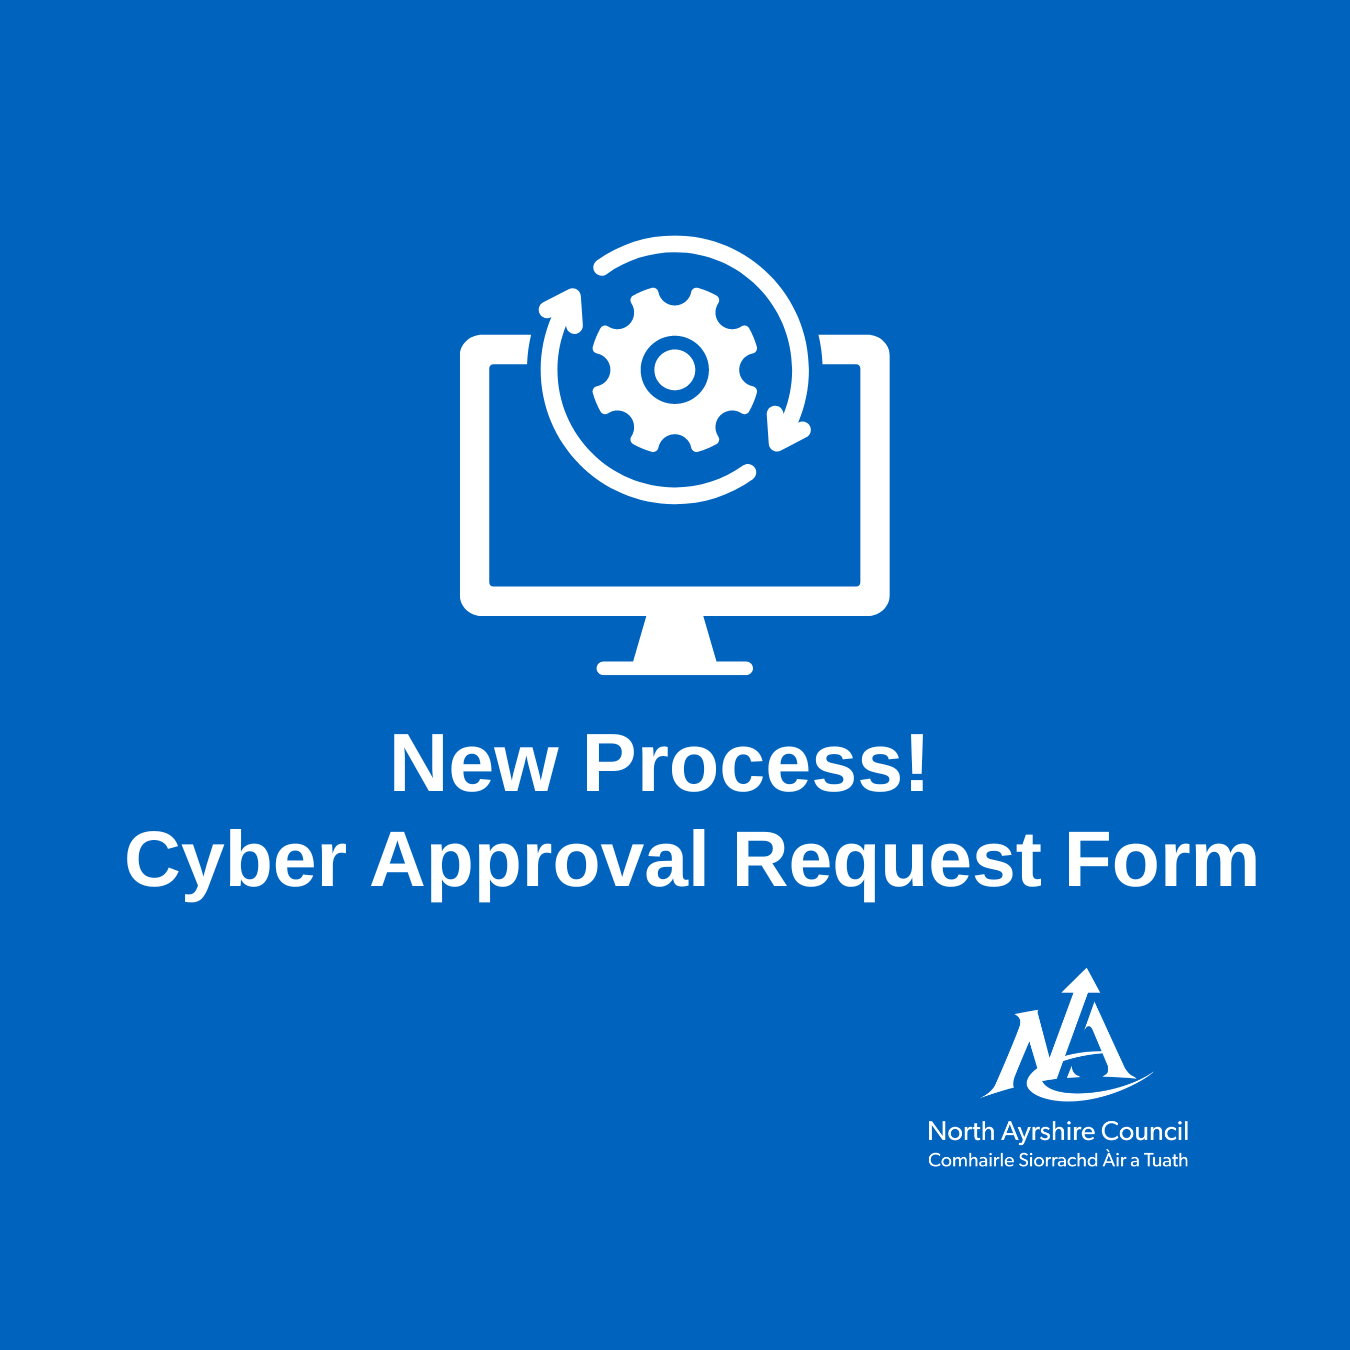 Icon of computer and arrow. New Process! Cyber Approval Request Form